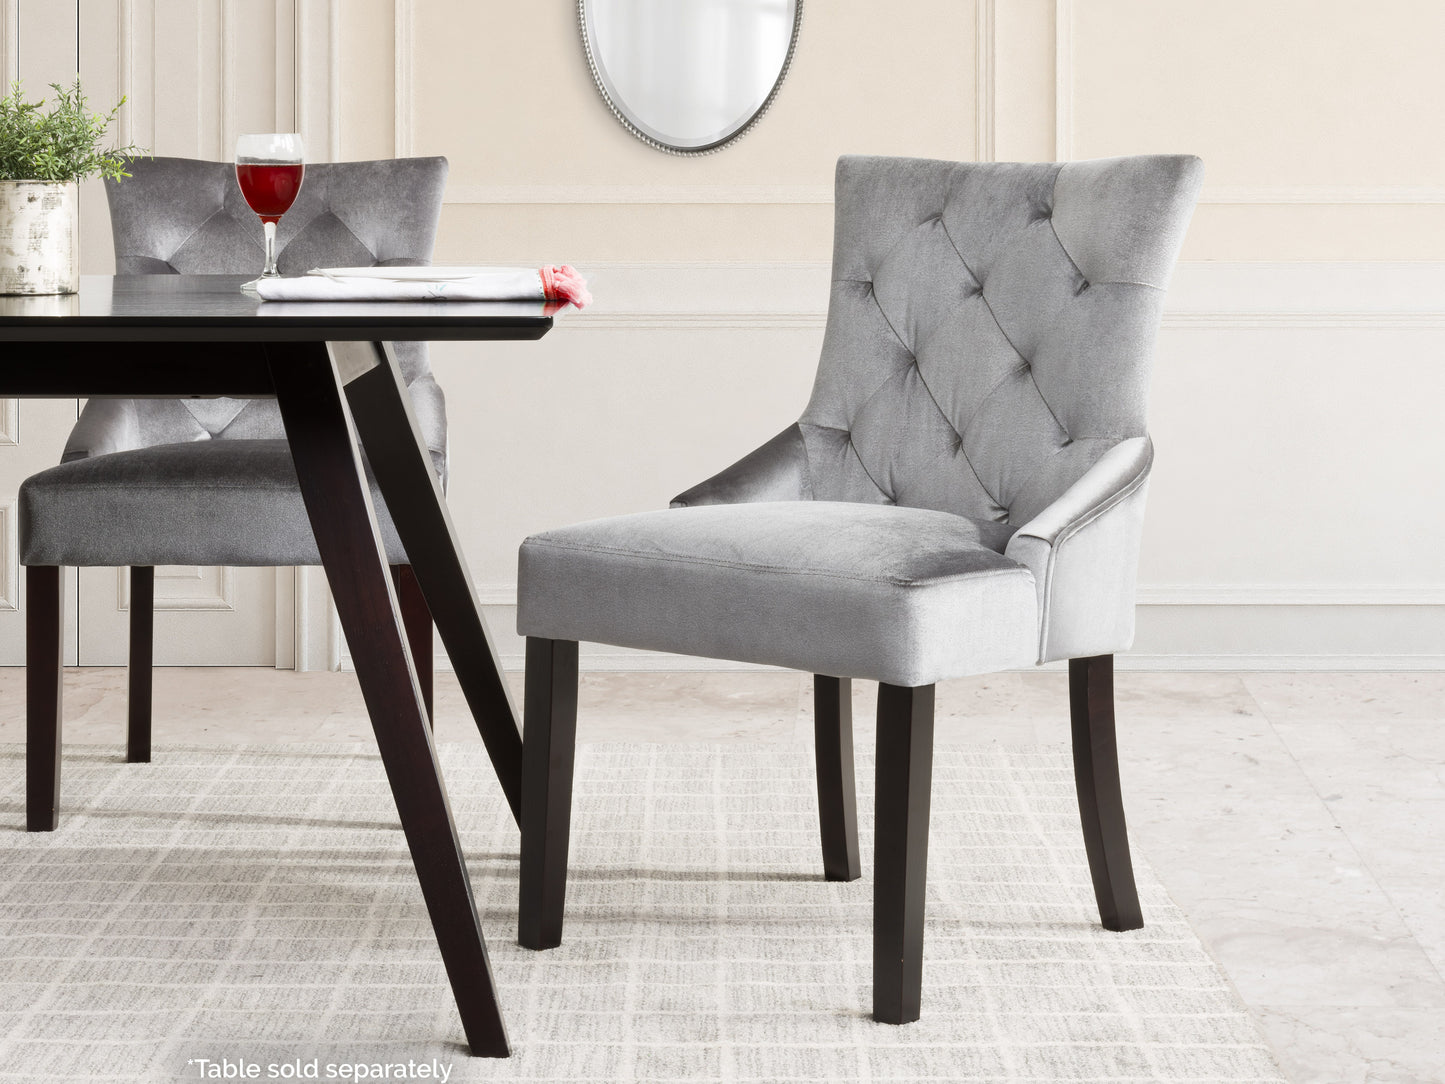 Accent Chairs, Set of 2